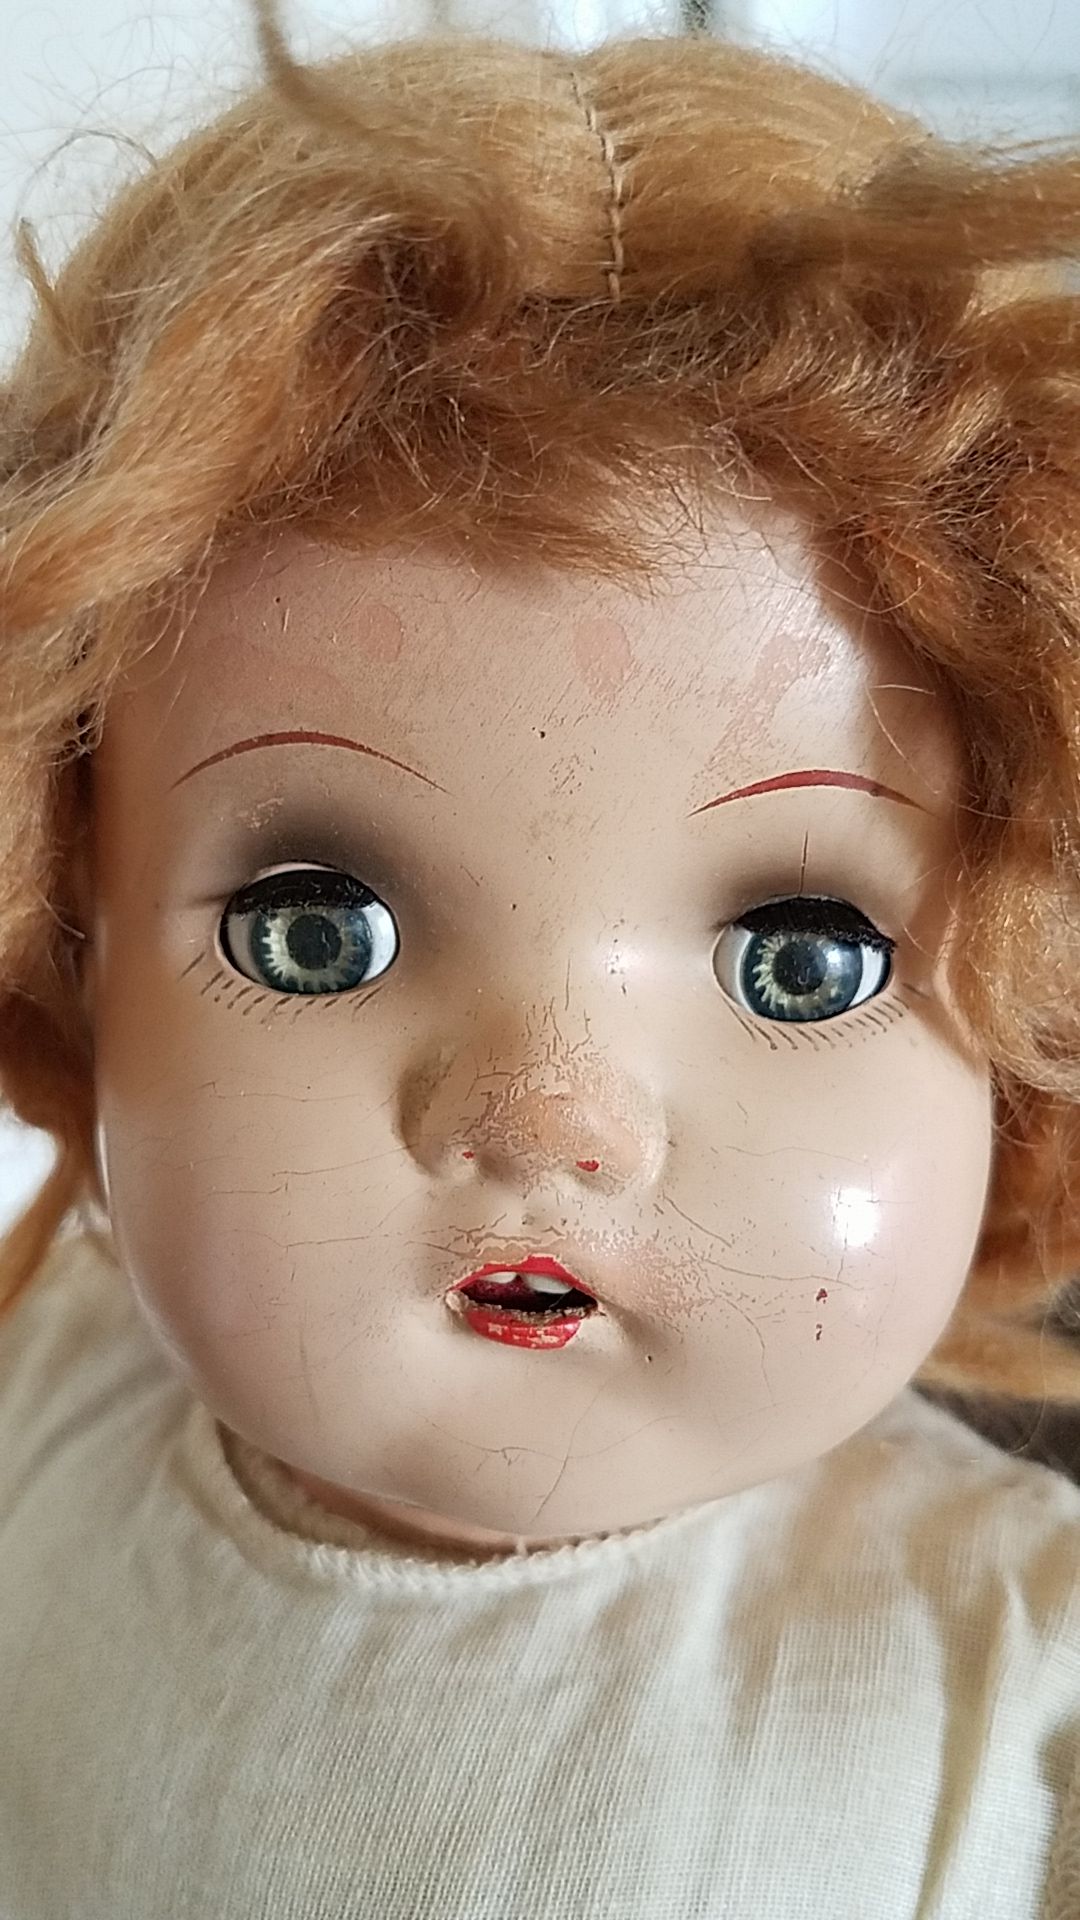 17 in antique doll